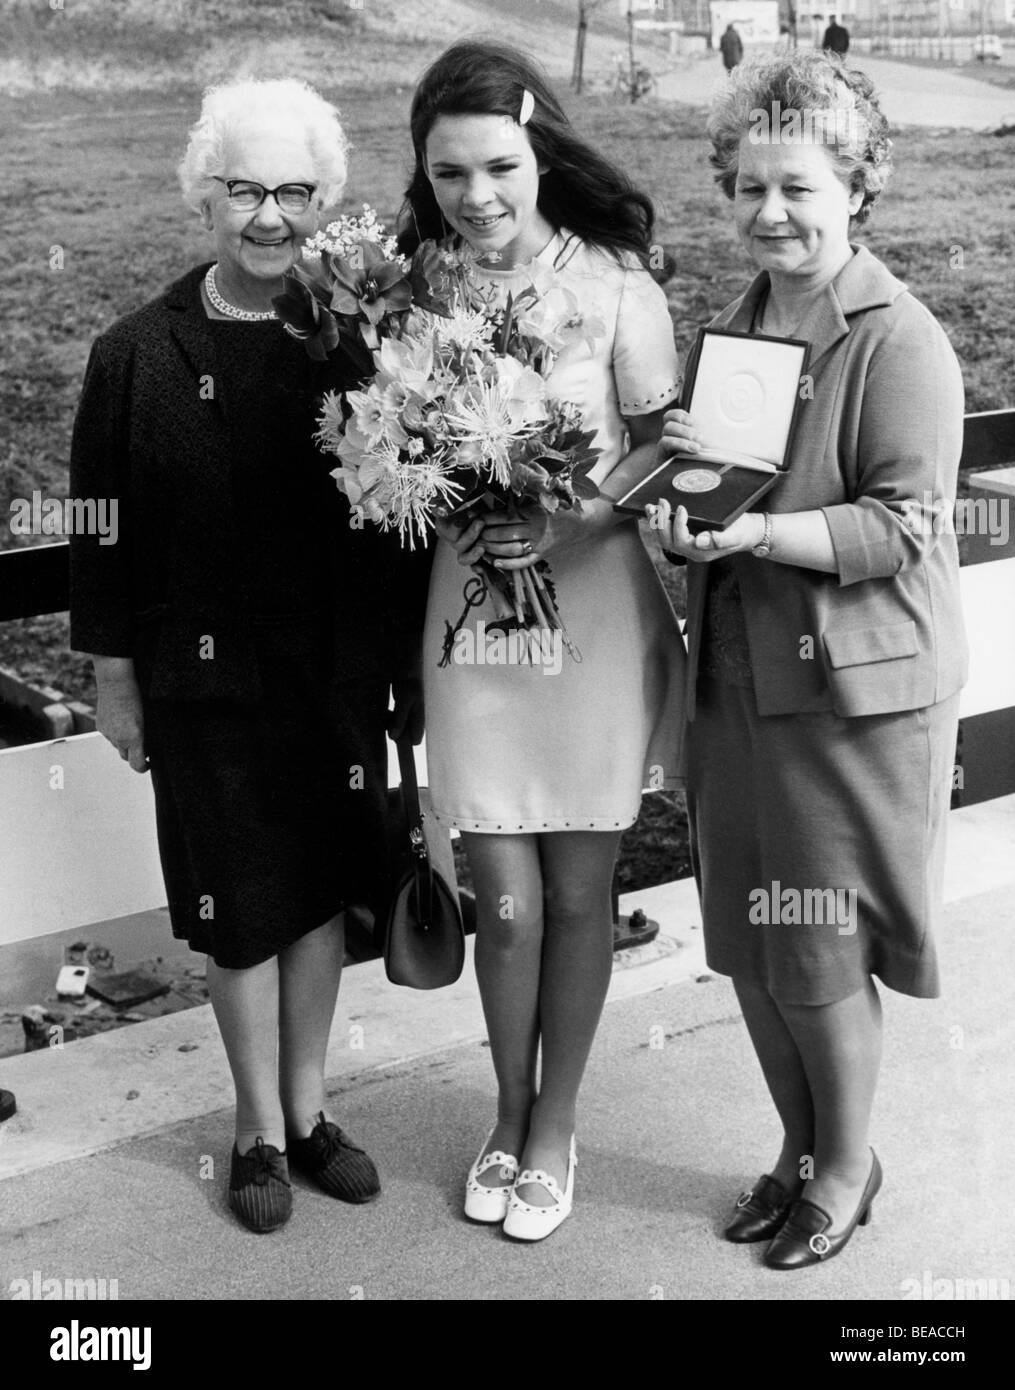 DANA  Irish pop singer with mother and grandmother after winning  1970 Eurovision Song Contest with 'All Kinds of Everything' Stock Photo